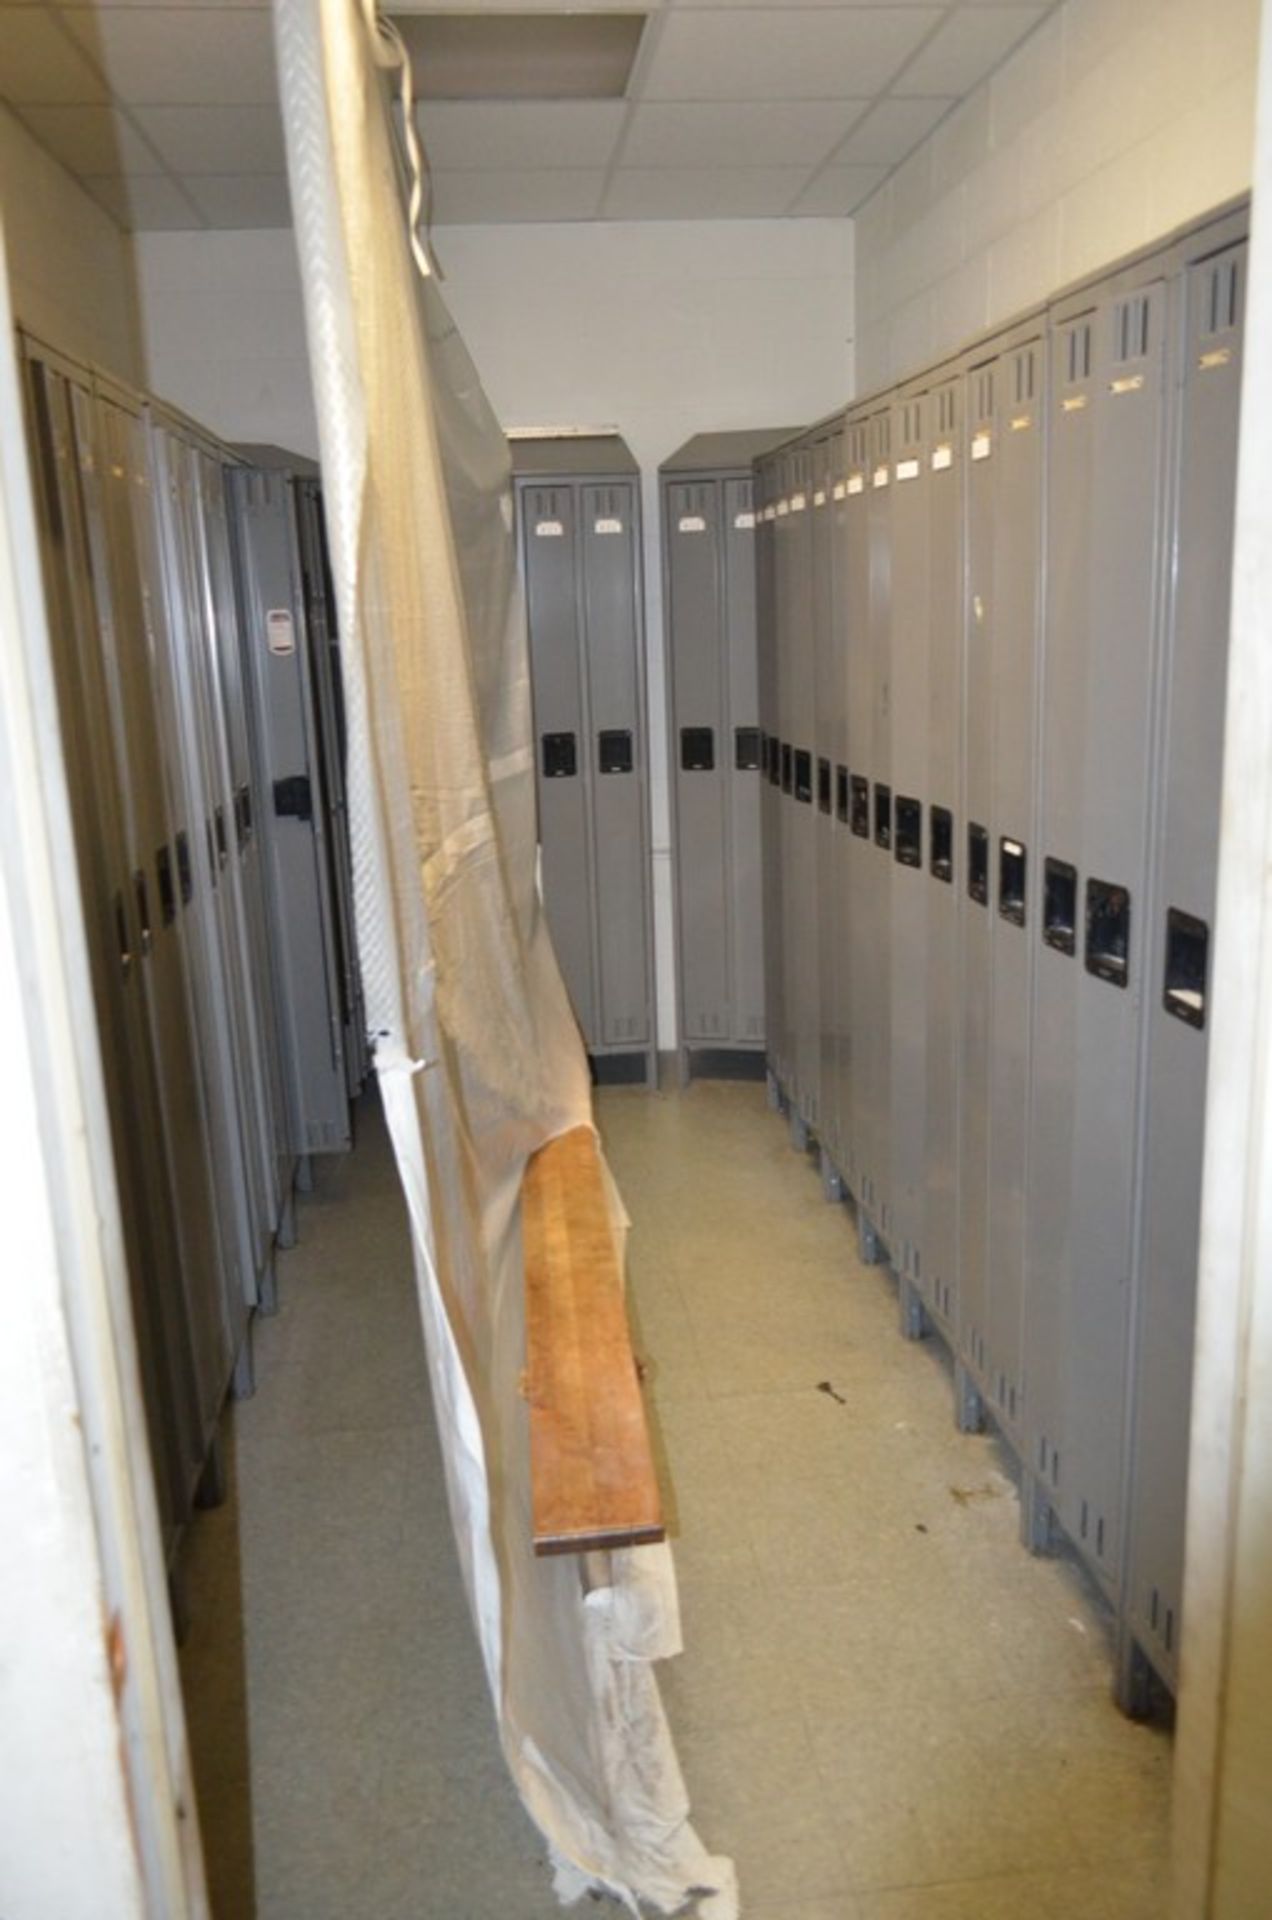 (Approx) 120 Lockers; Location in Plant: Outside Main Offices on Mezzanine - Image 4 of 4